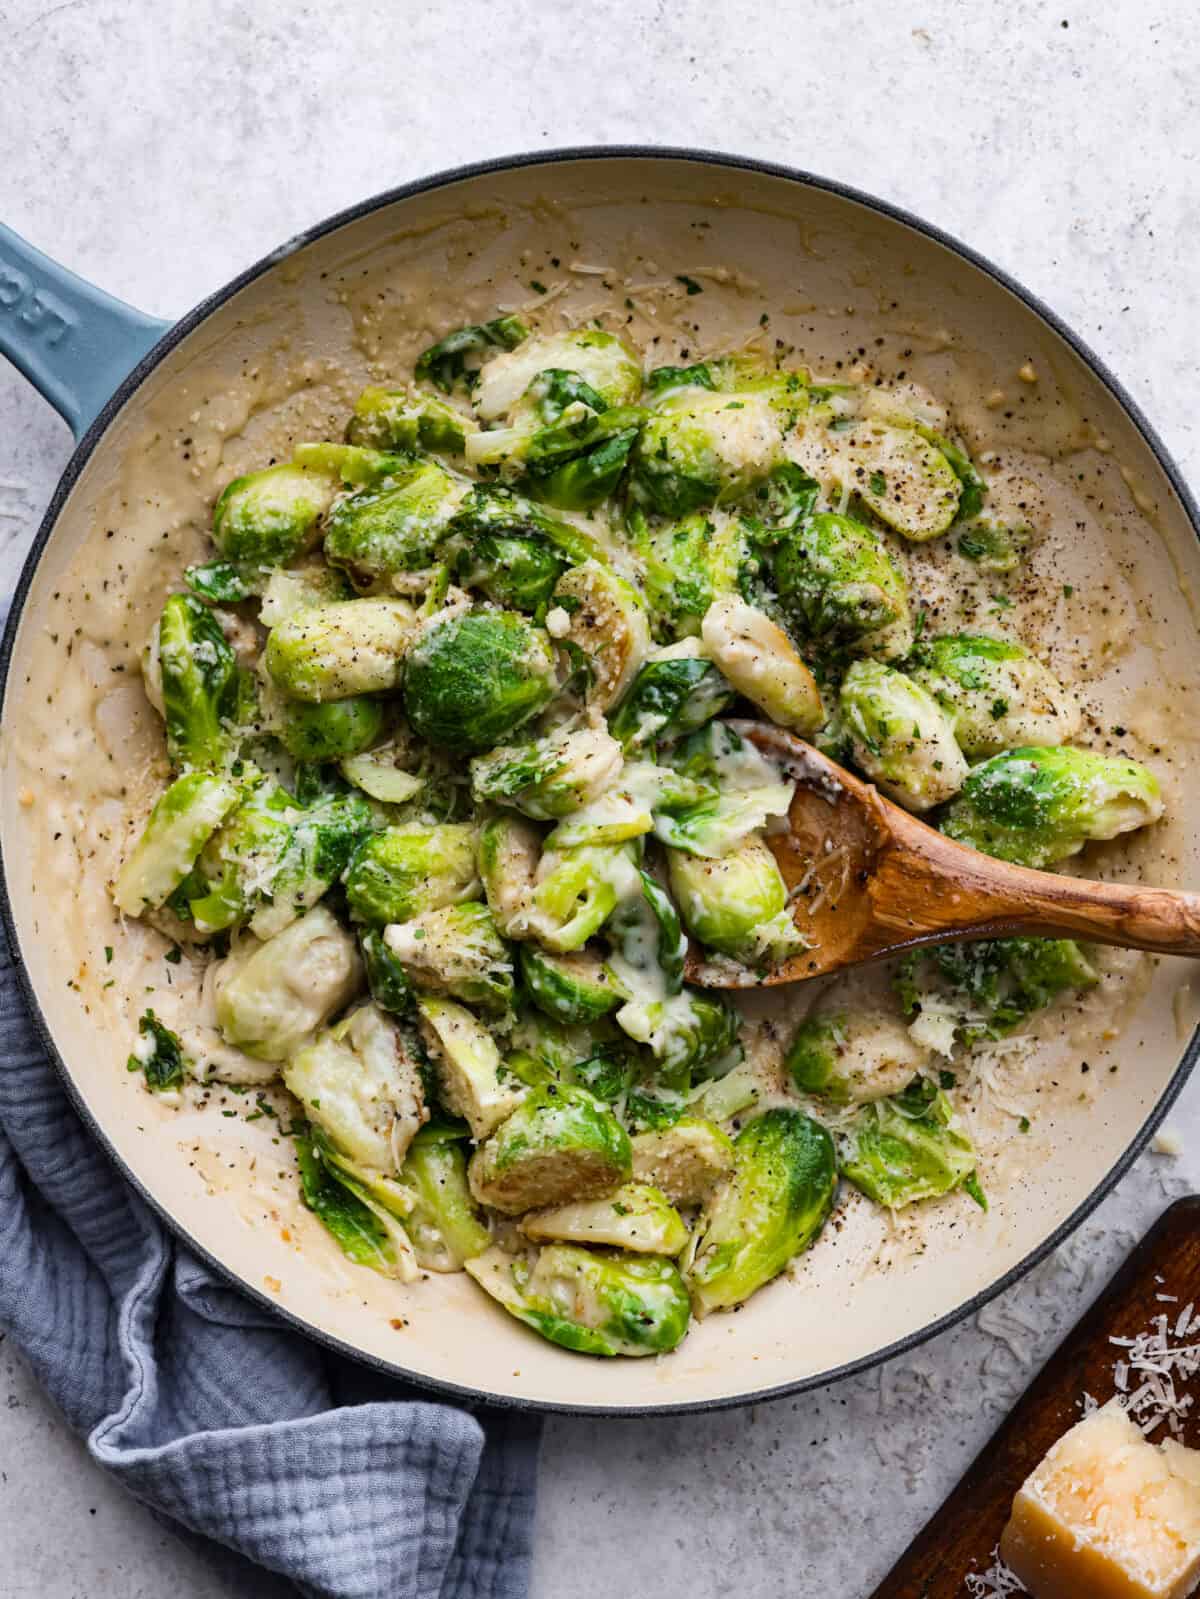 Top view of creamy brussels sprouts in a skillet with a wooden spoon.